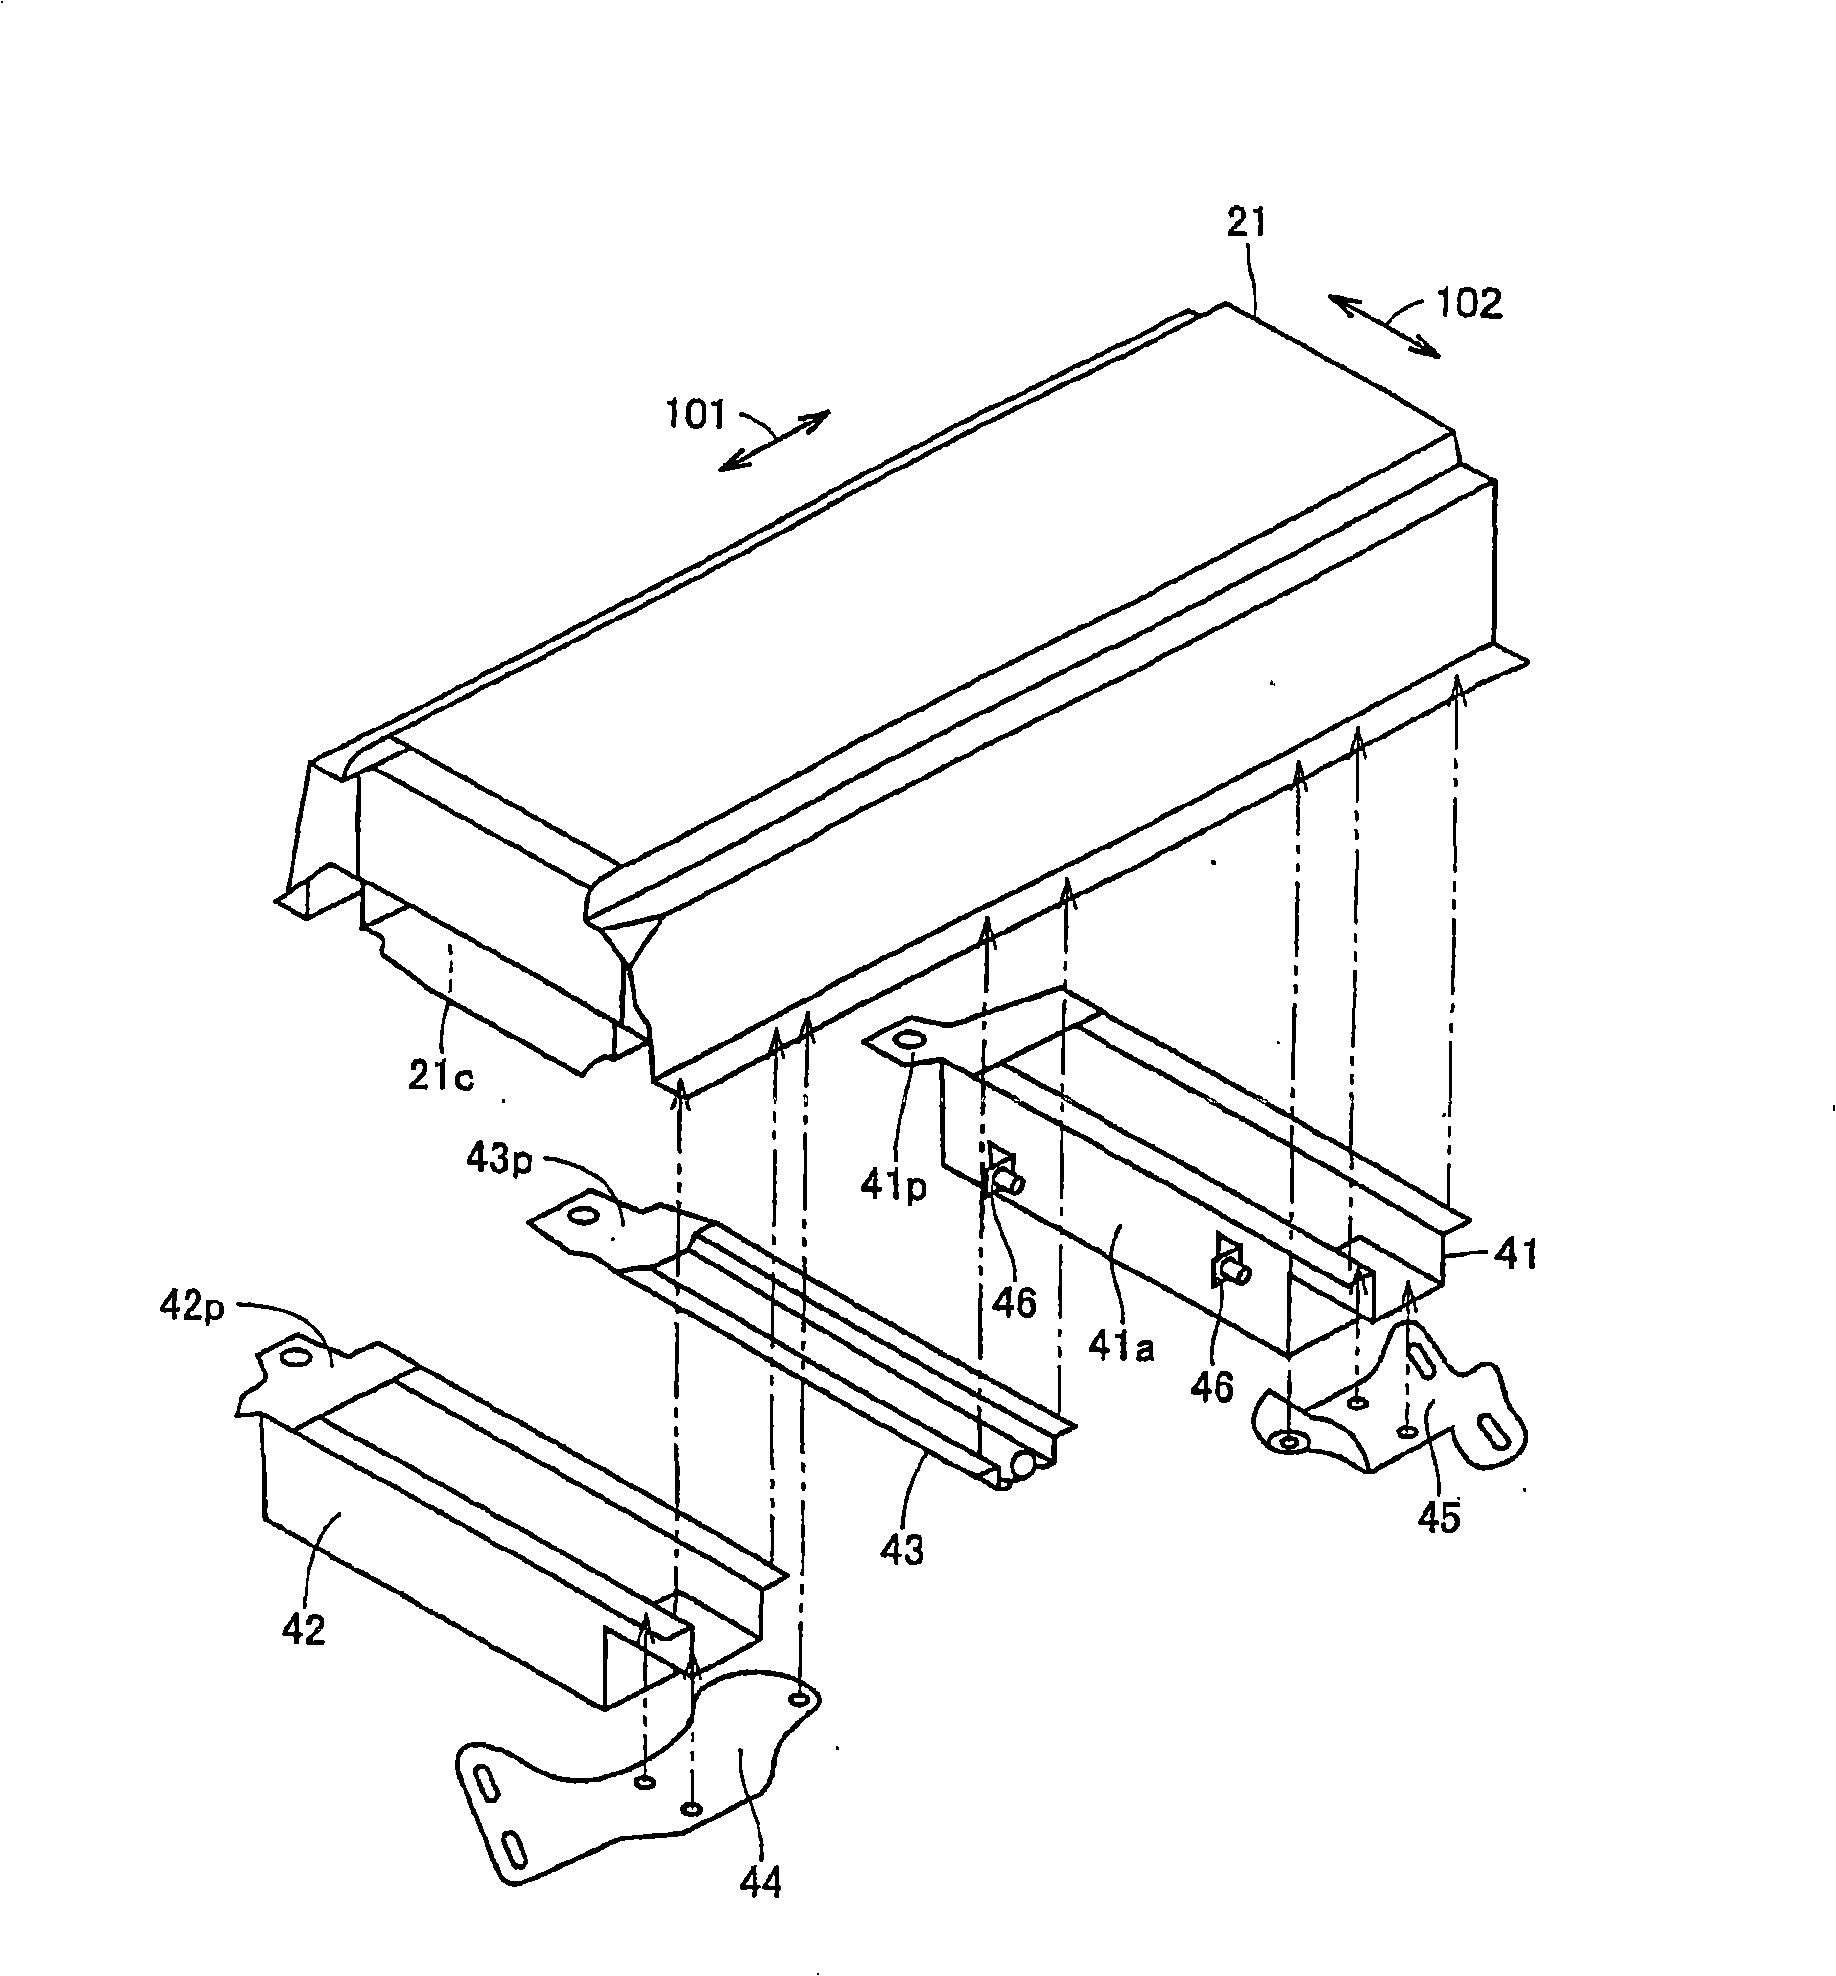 Structure of power supply to be mounted on vehicle